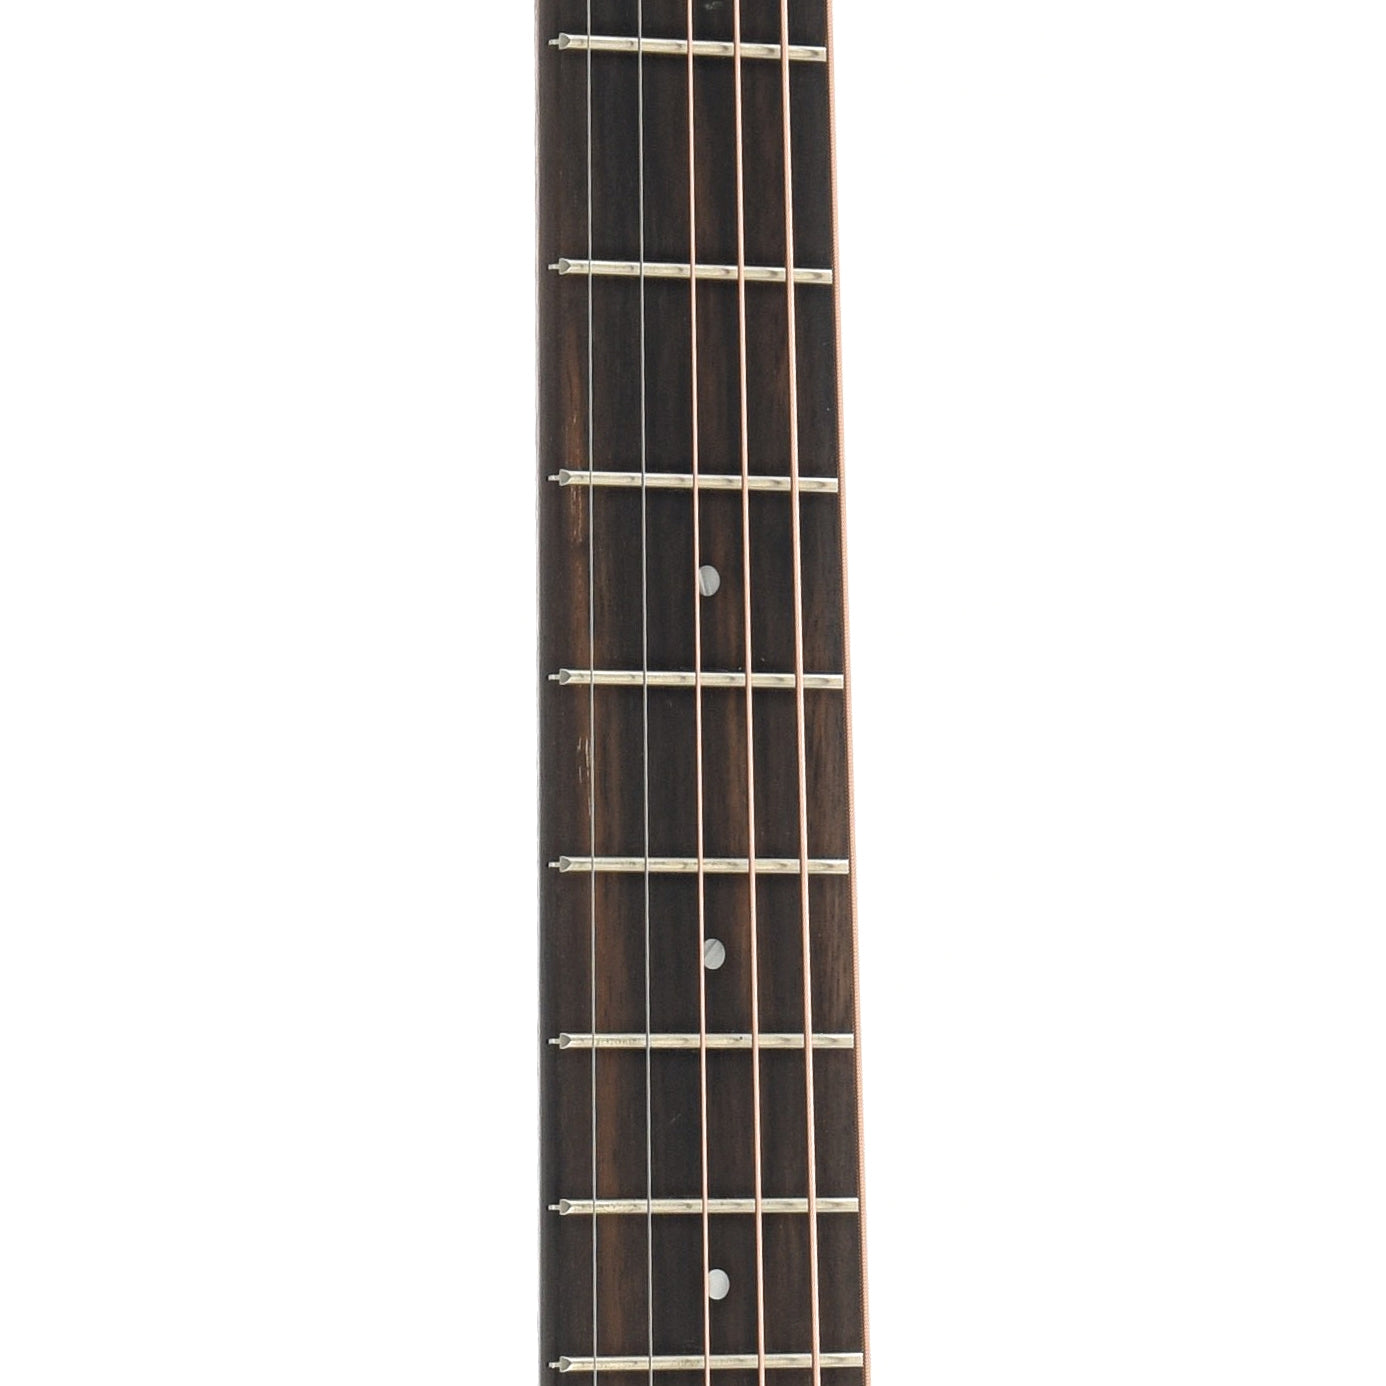 Fretboard of Taylor BT2 Mahogany Baby Taylor Acoustic Guitar Left Handed